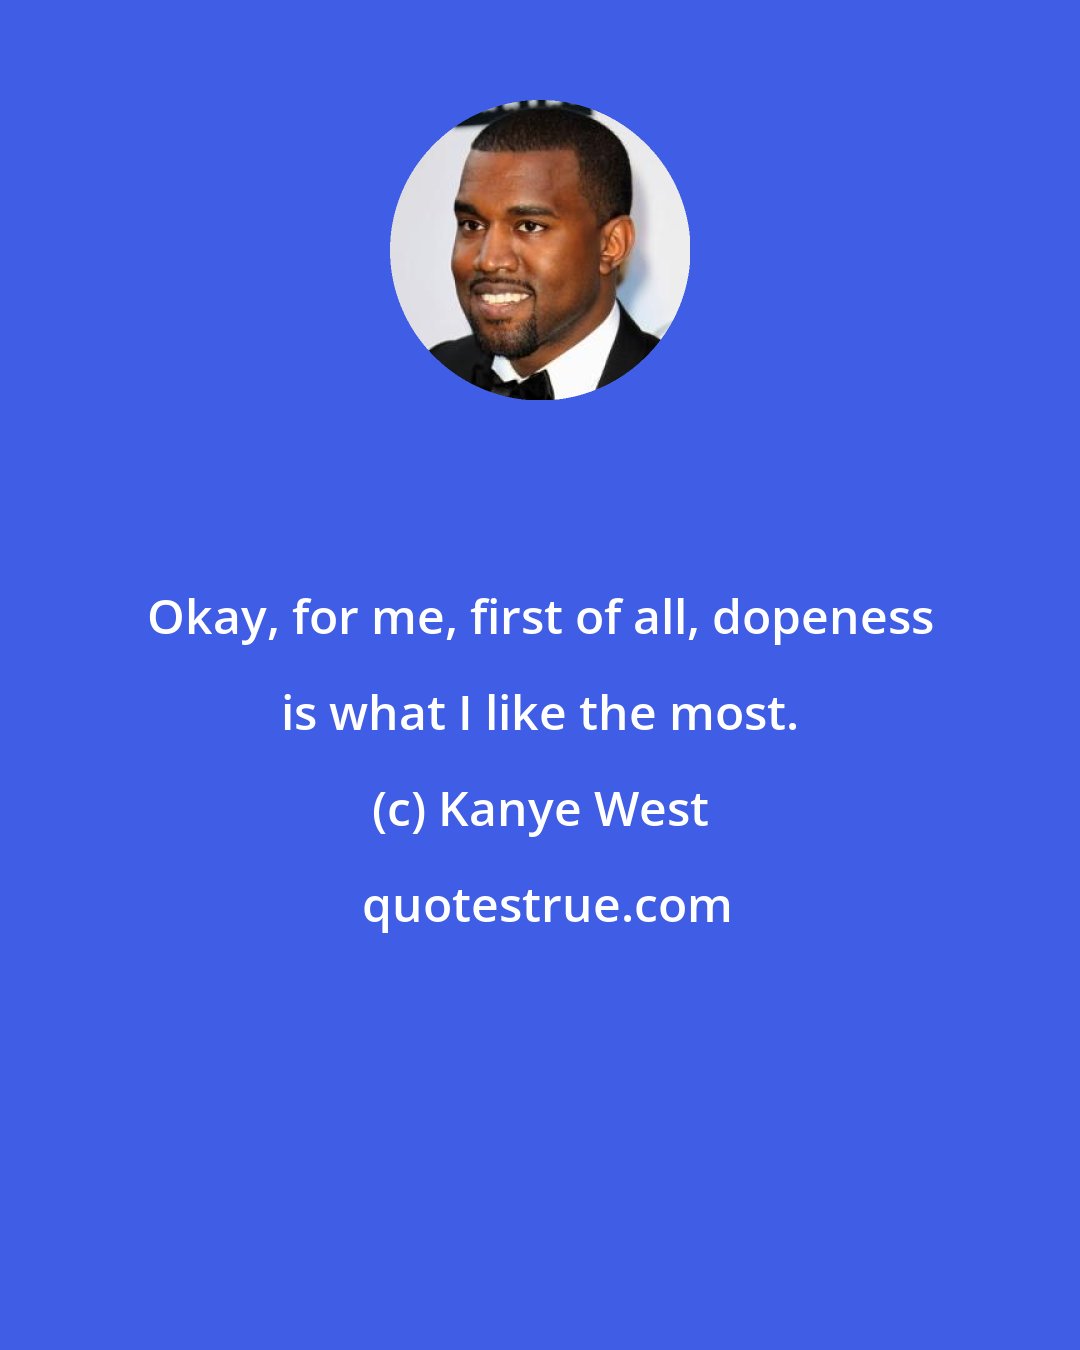 Kanye West: Okay, for me, first of all, dopeness is what I like the most.